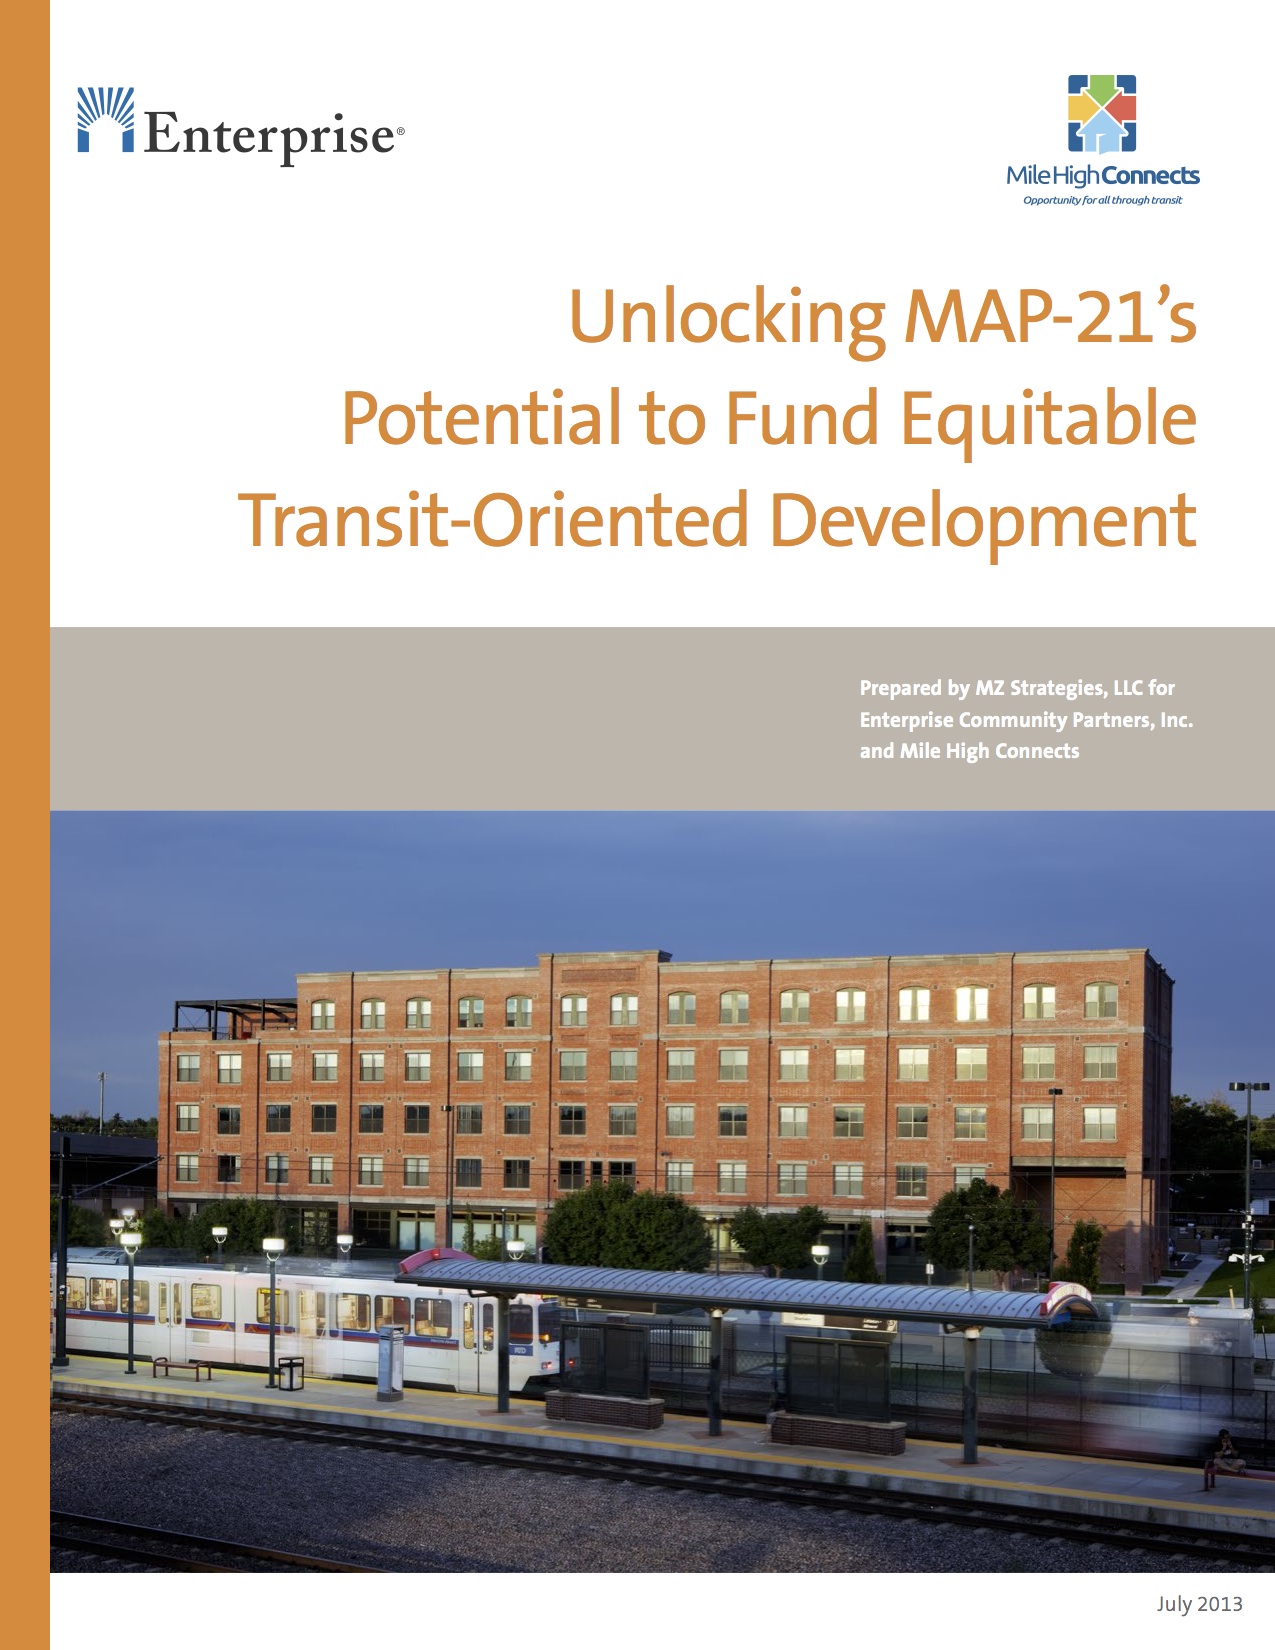 Unlocking MAP-21’s Potential to Fund Equitable Transit-Oriented Development